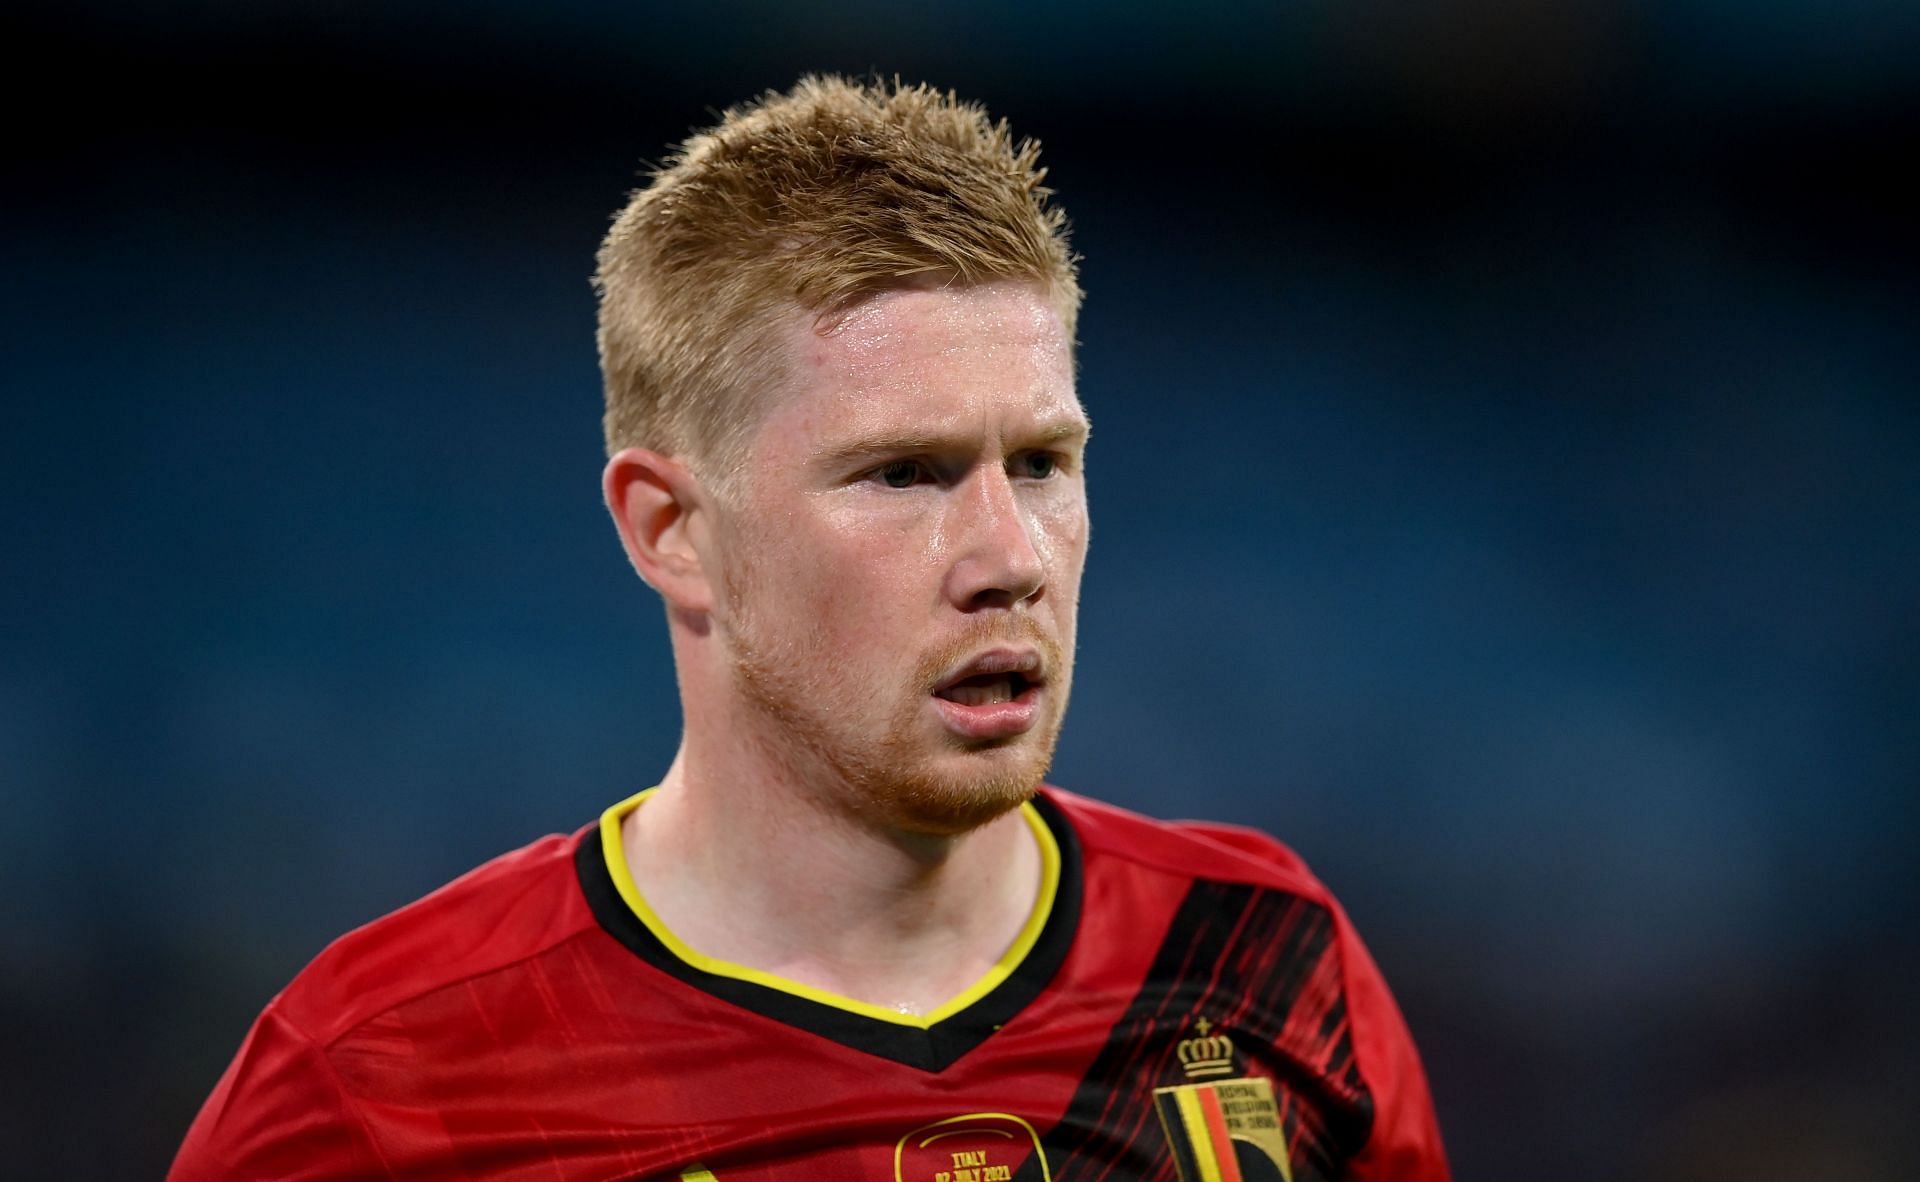 Kevin de Bruyne has proven time and again that he does not have a weak foot